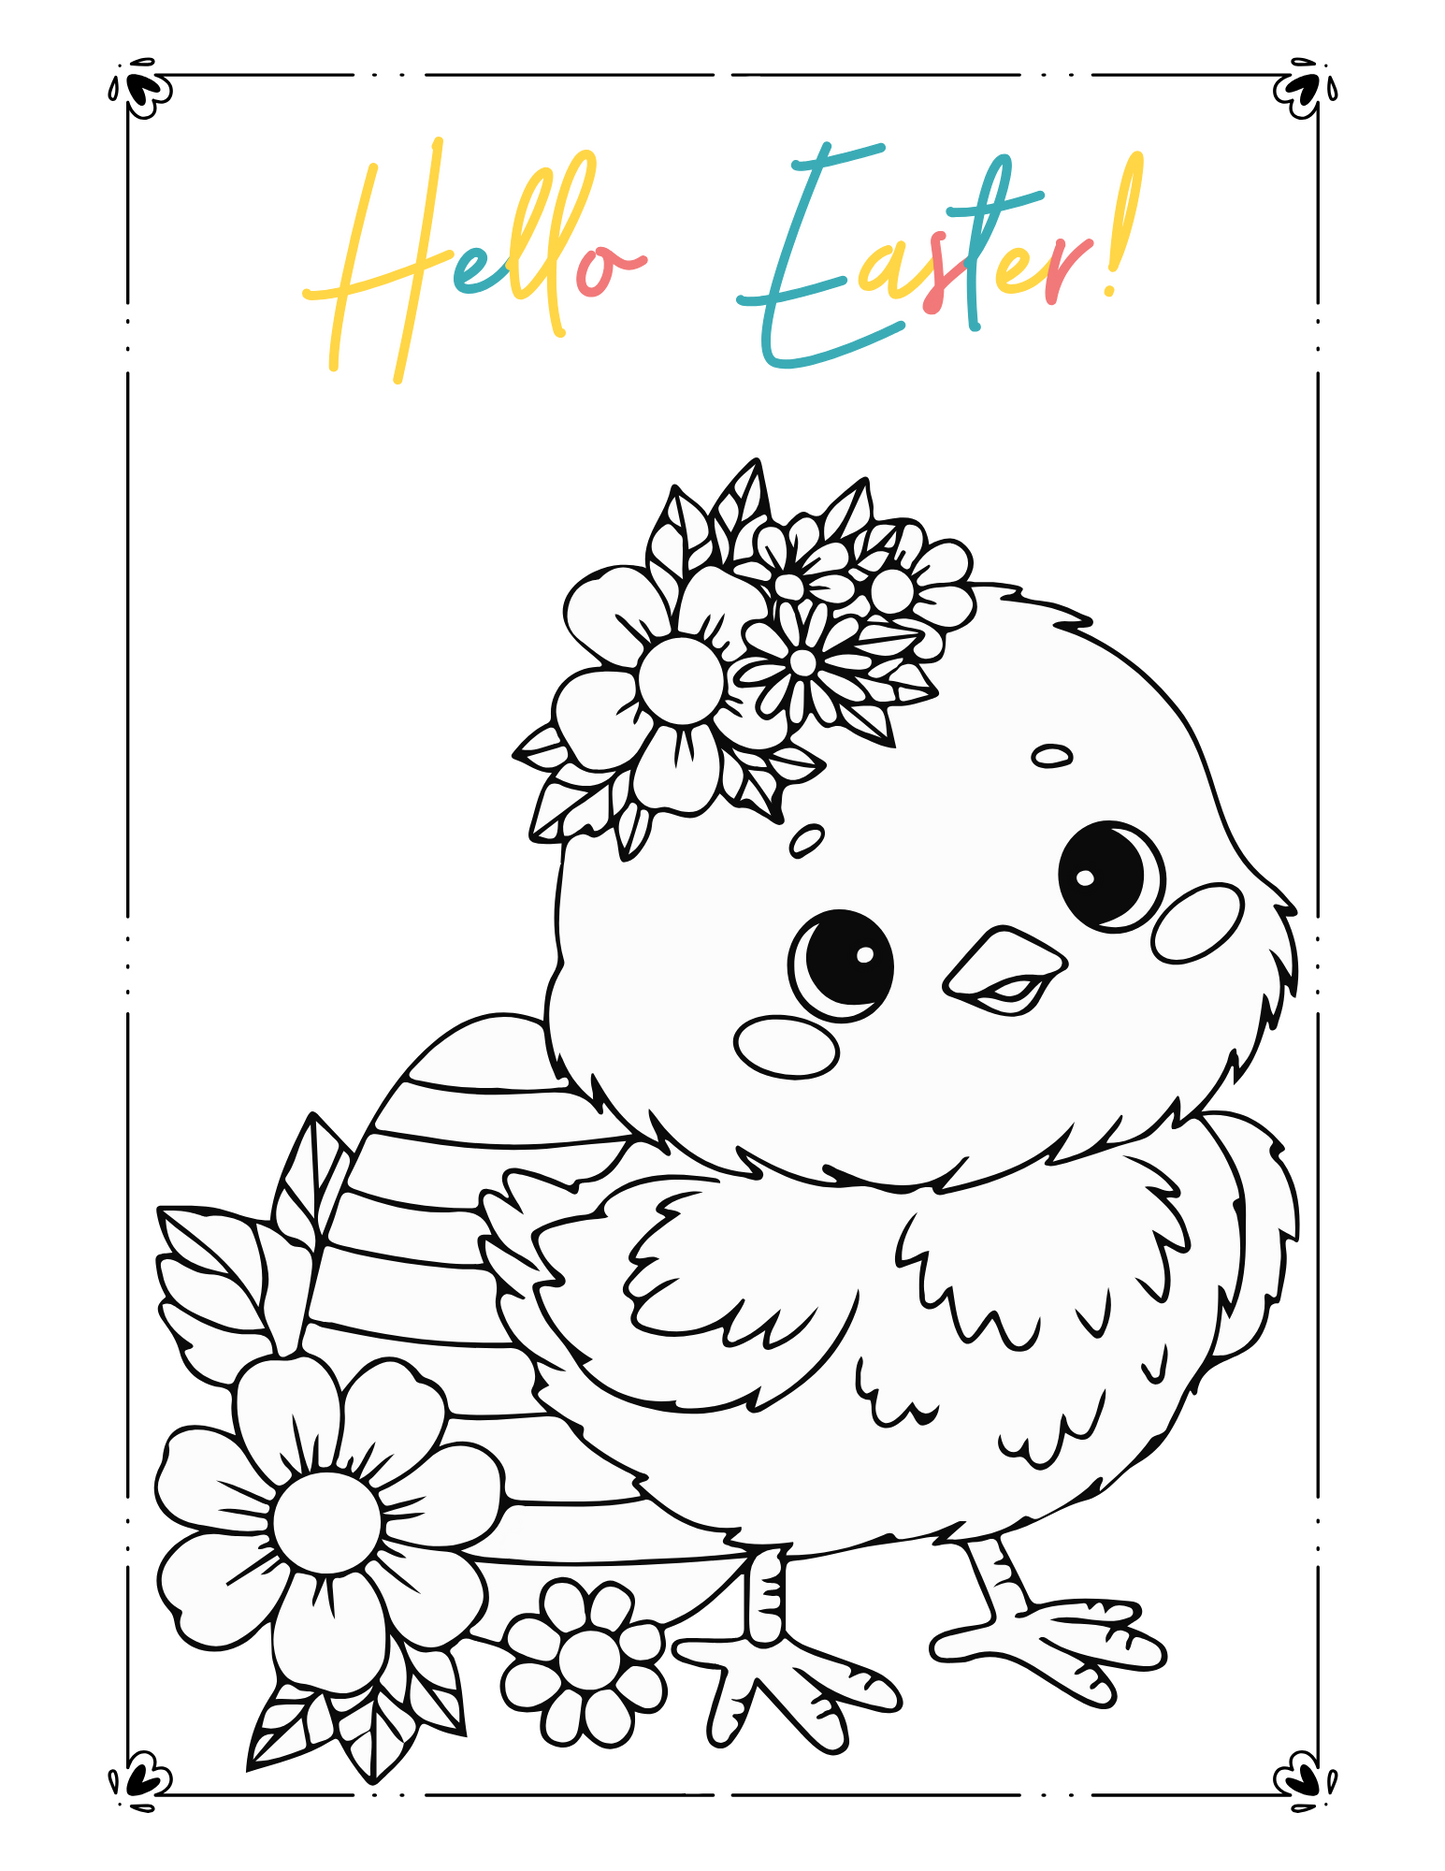 Easter Coloring Pages Digital Download - 8 pages of Easter Fun!